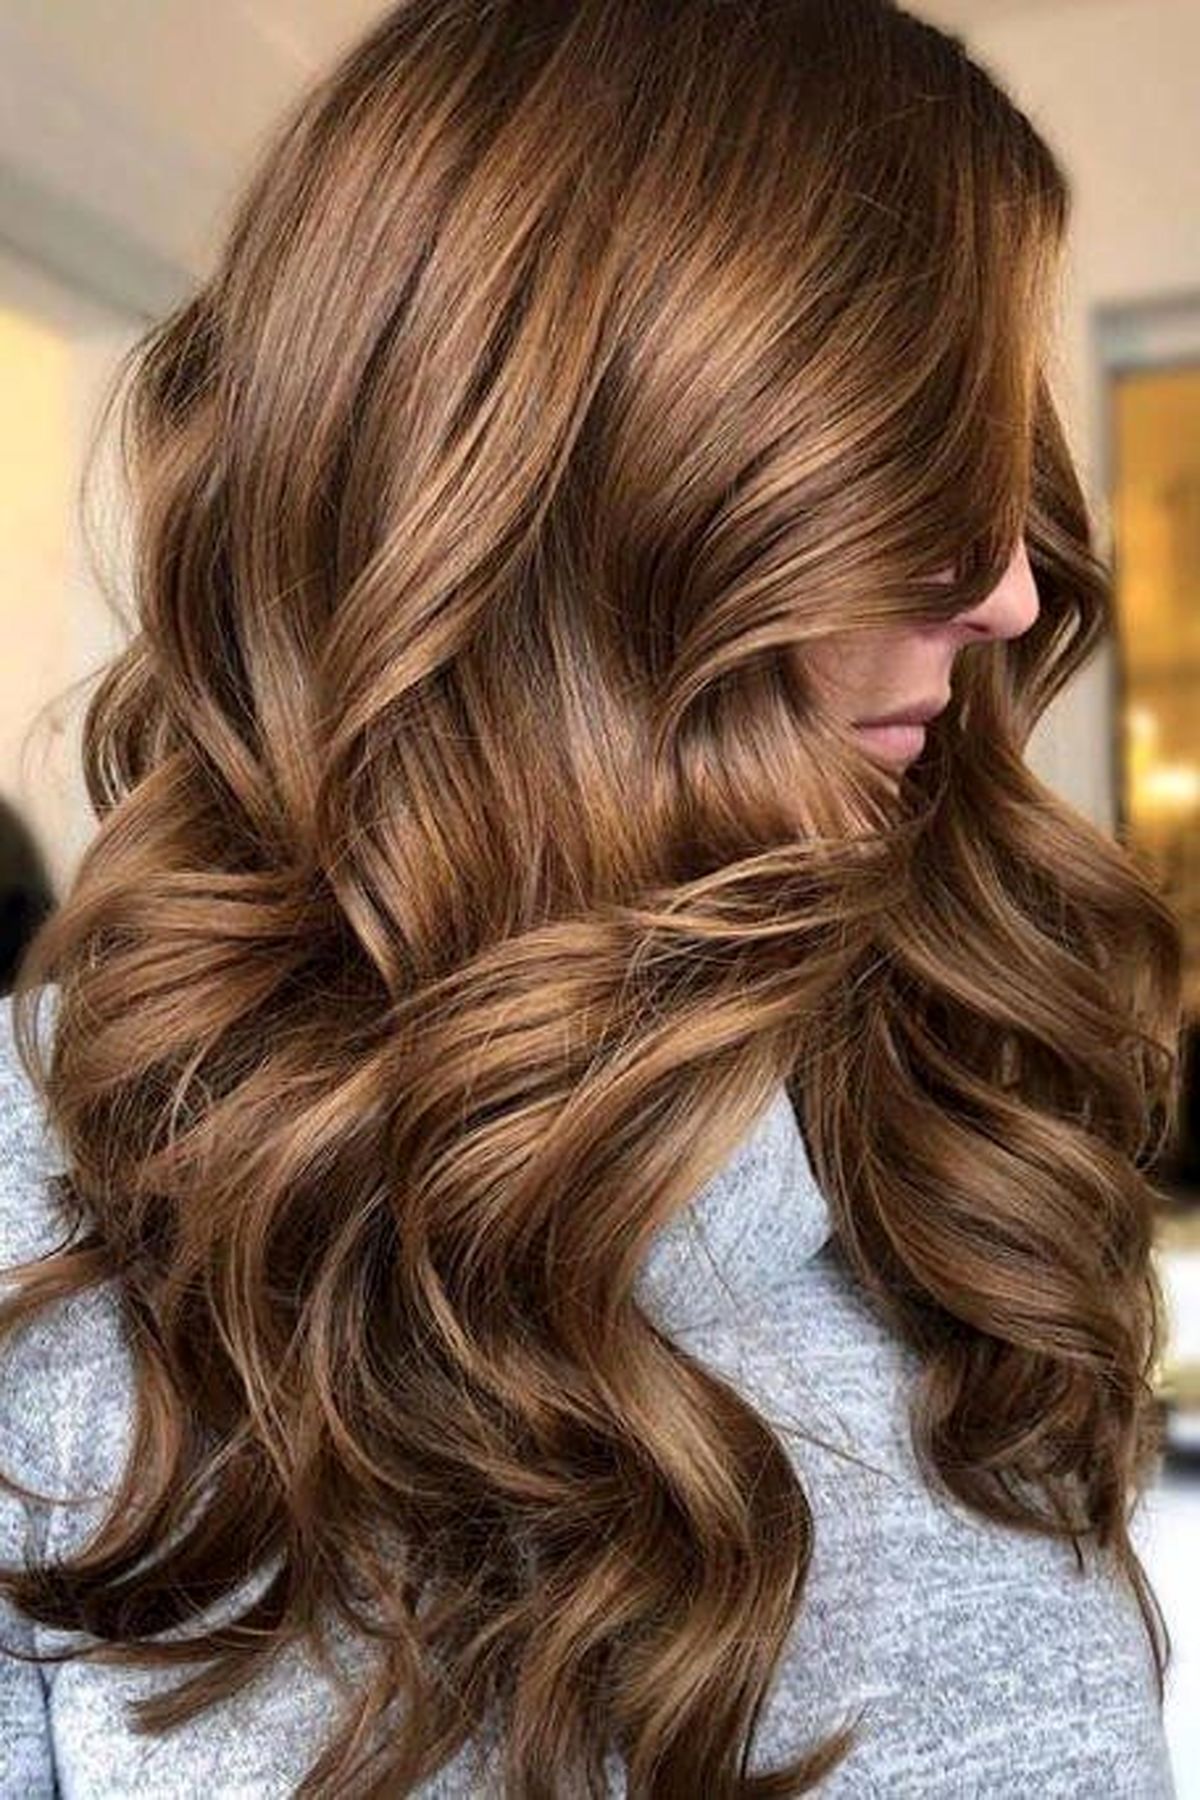 Hair-Color-Ideas-That’ll-Make-This-Summer-Feel-Totally-Fresh-for-Blondes-Brunettes-and-Redheads